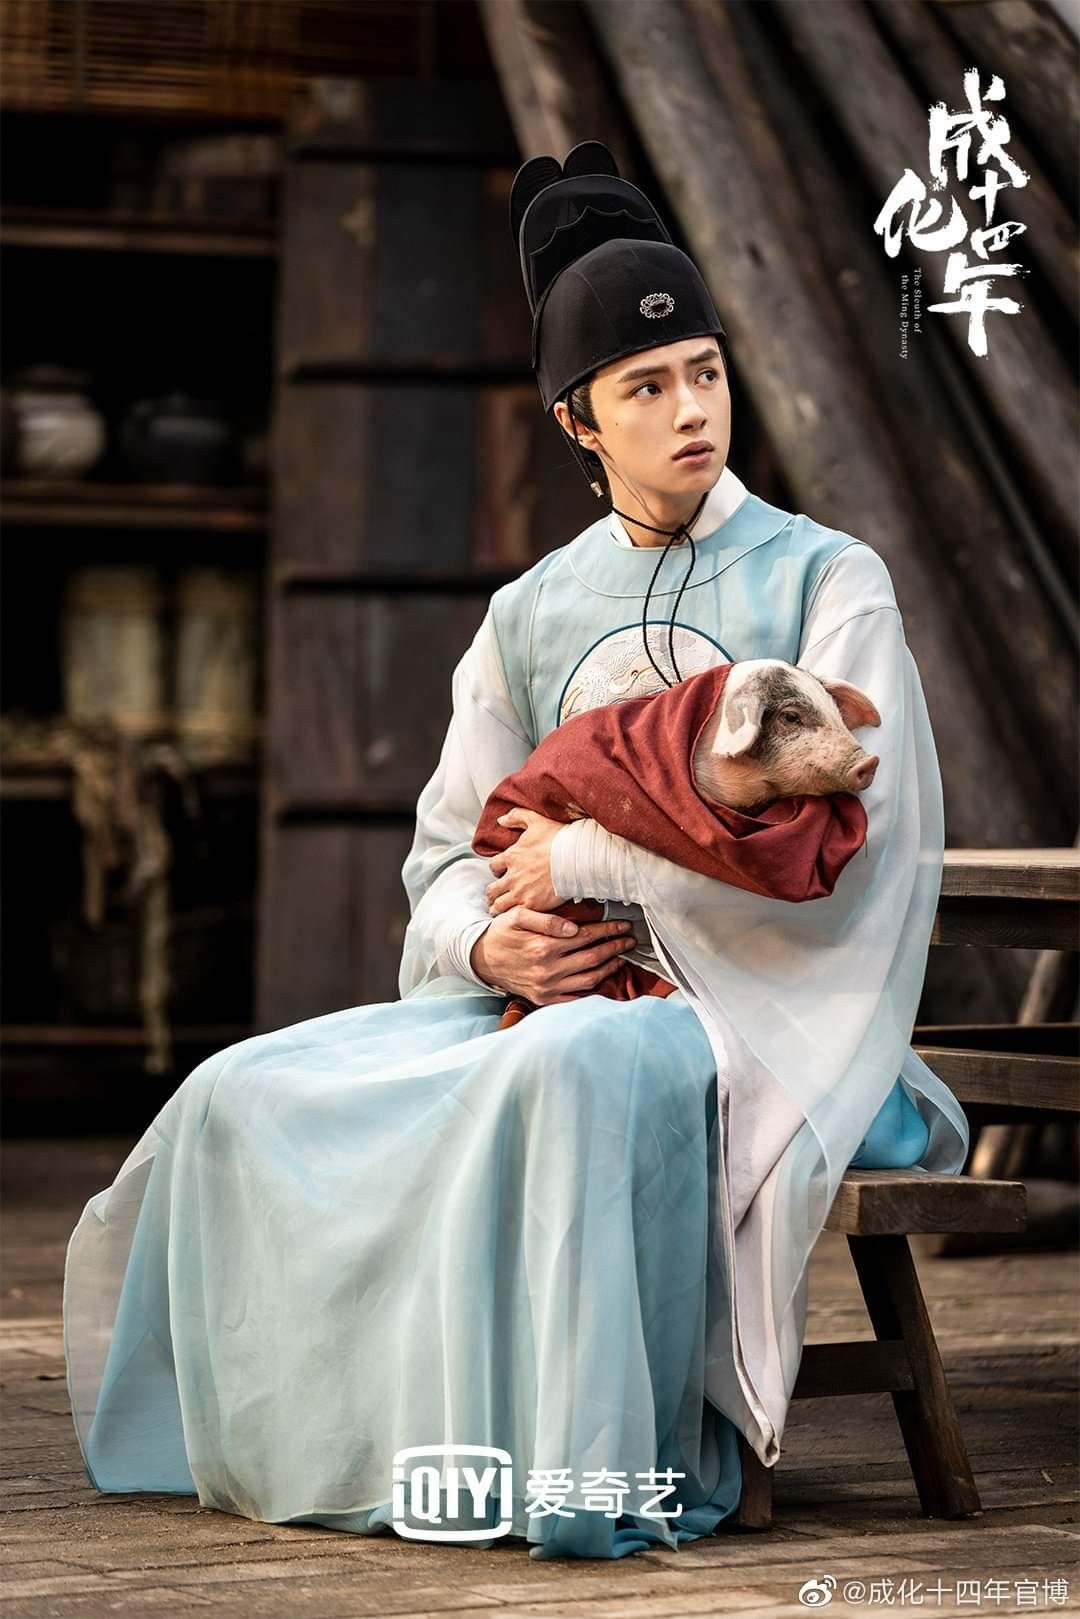 The sleuth of Ming Dynasty. ideas. ming dynasty, hua ze lei, drama